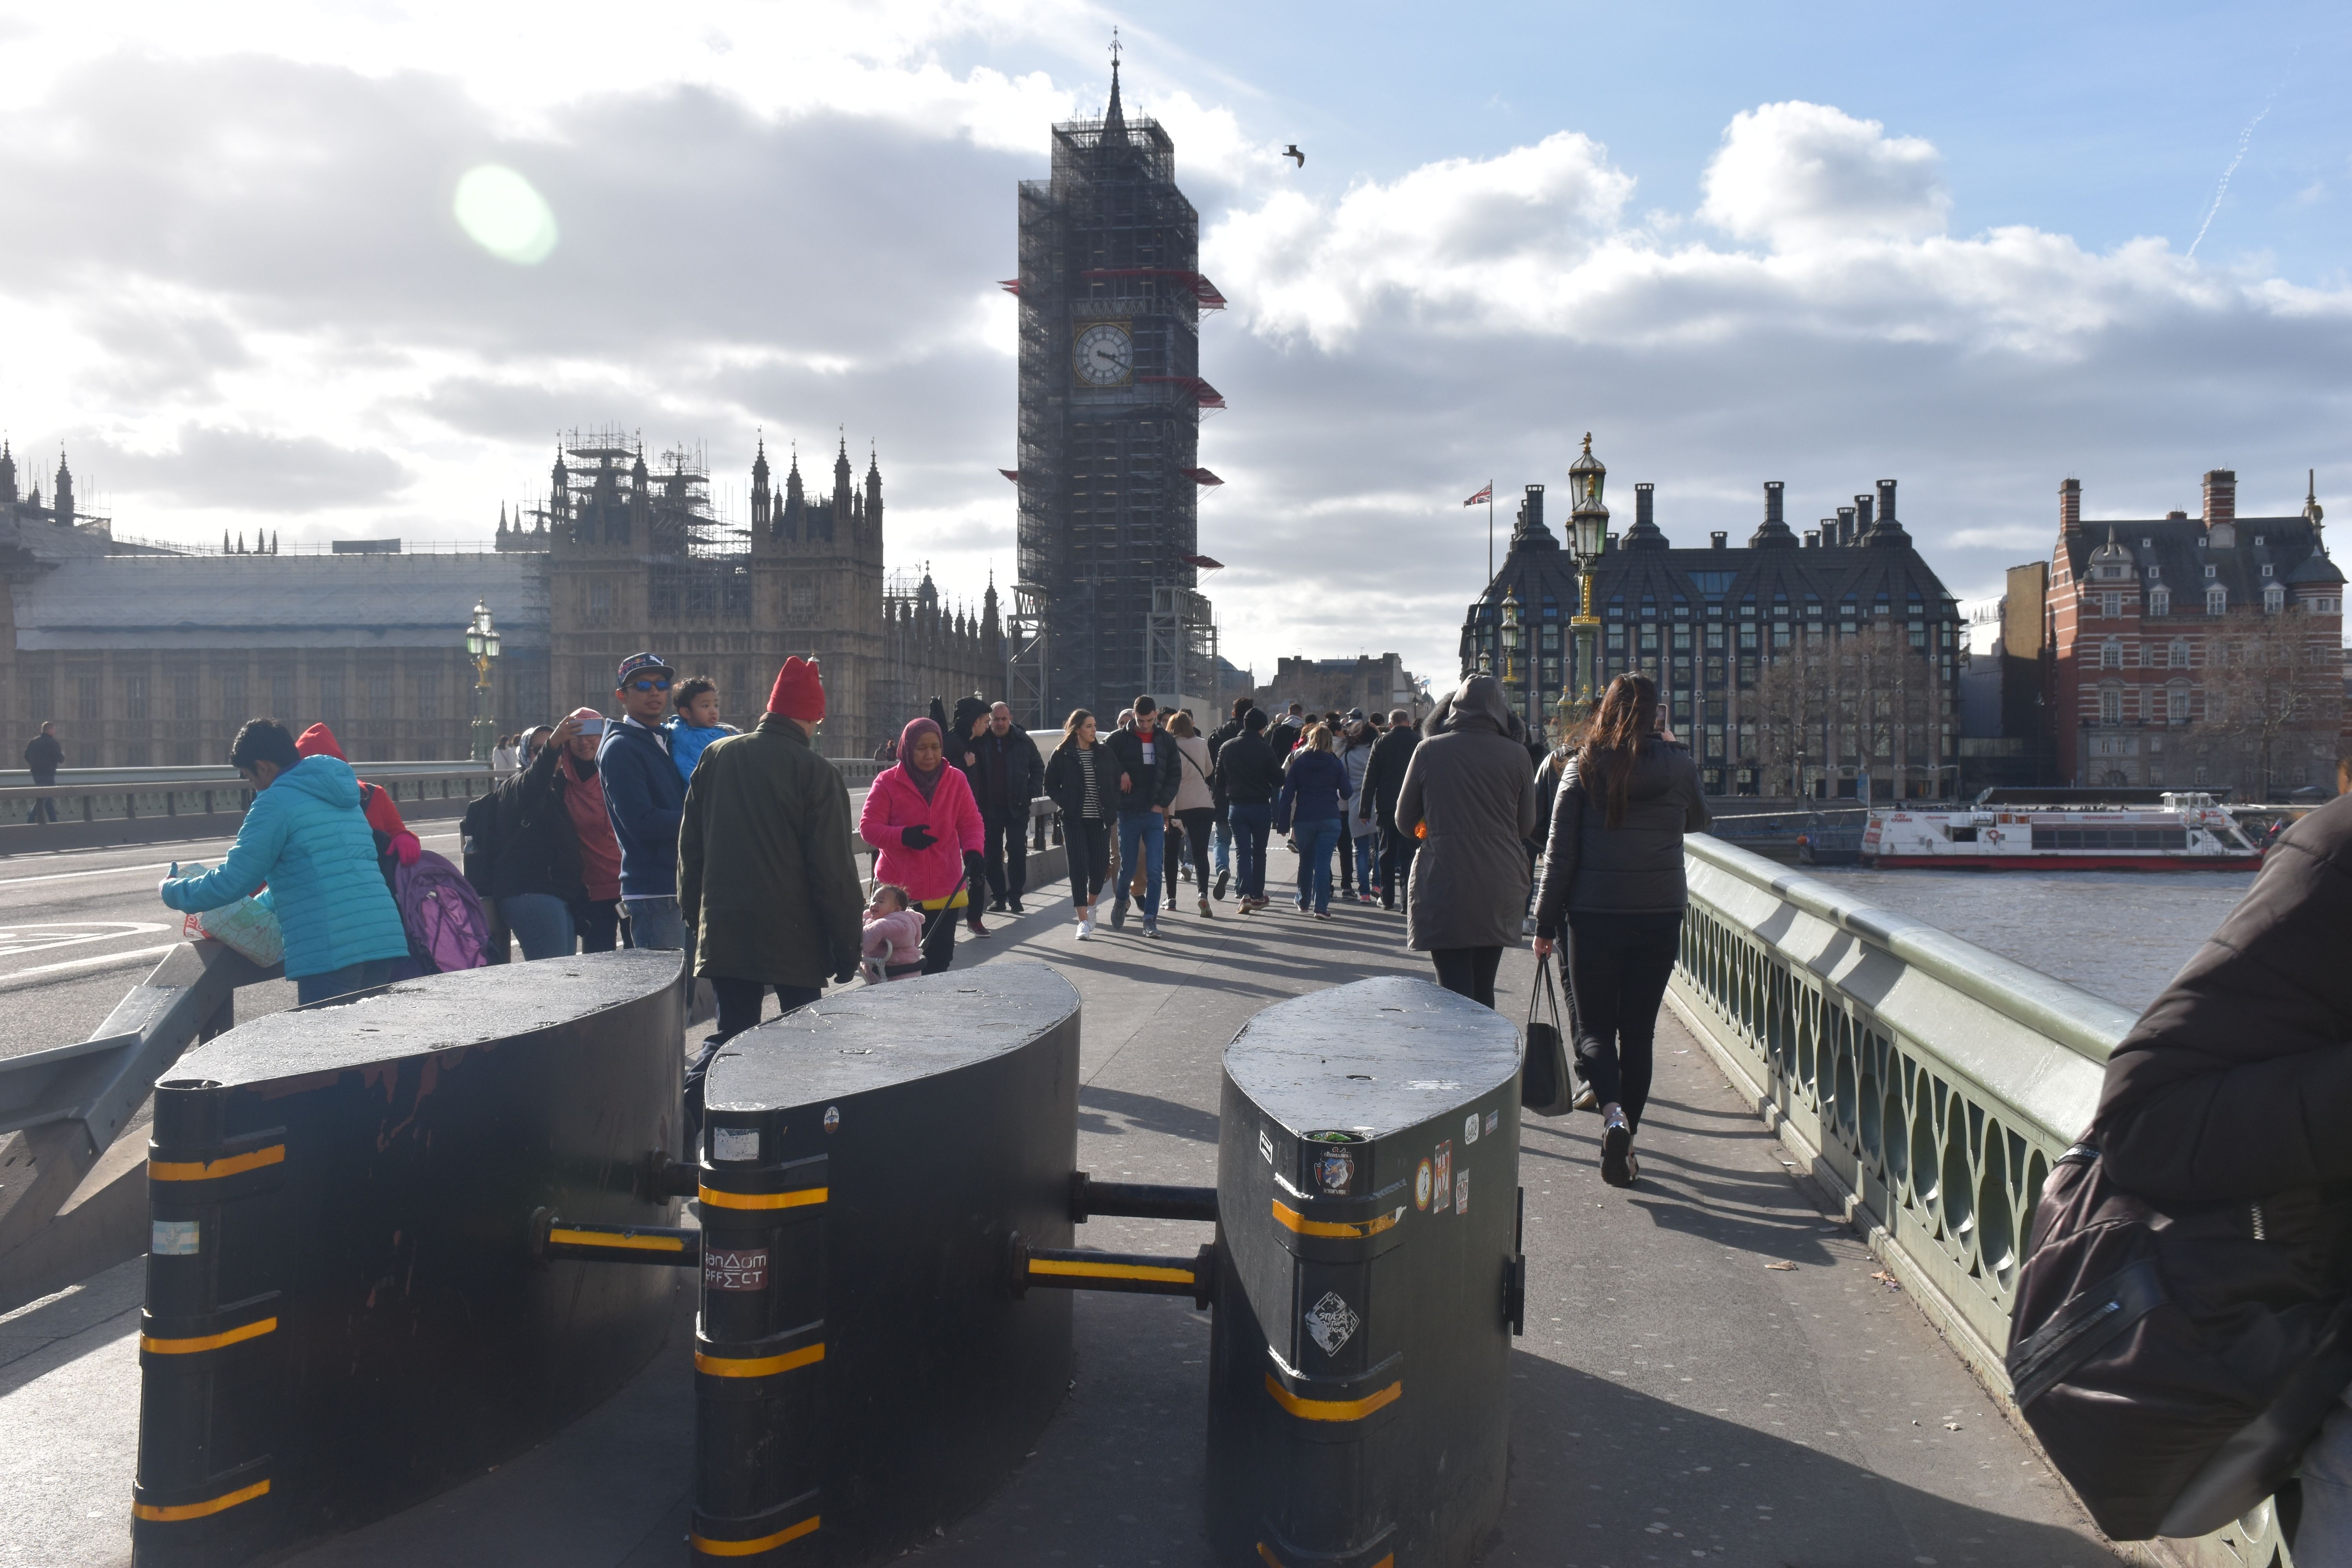 Barricades on either side of the iconic Westminster Bridge were installed to prevent vehicles from driving on the sidewalk as seen in the 2017 London Bridge attack. Image by Paul LeBlanc. United Kingdom, 2018.